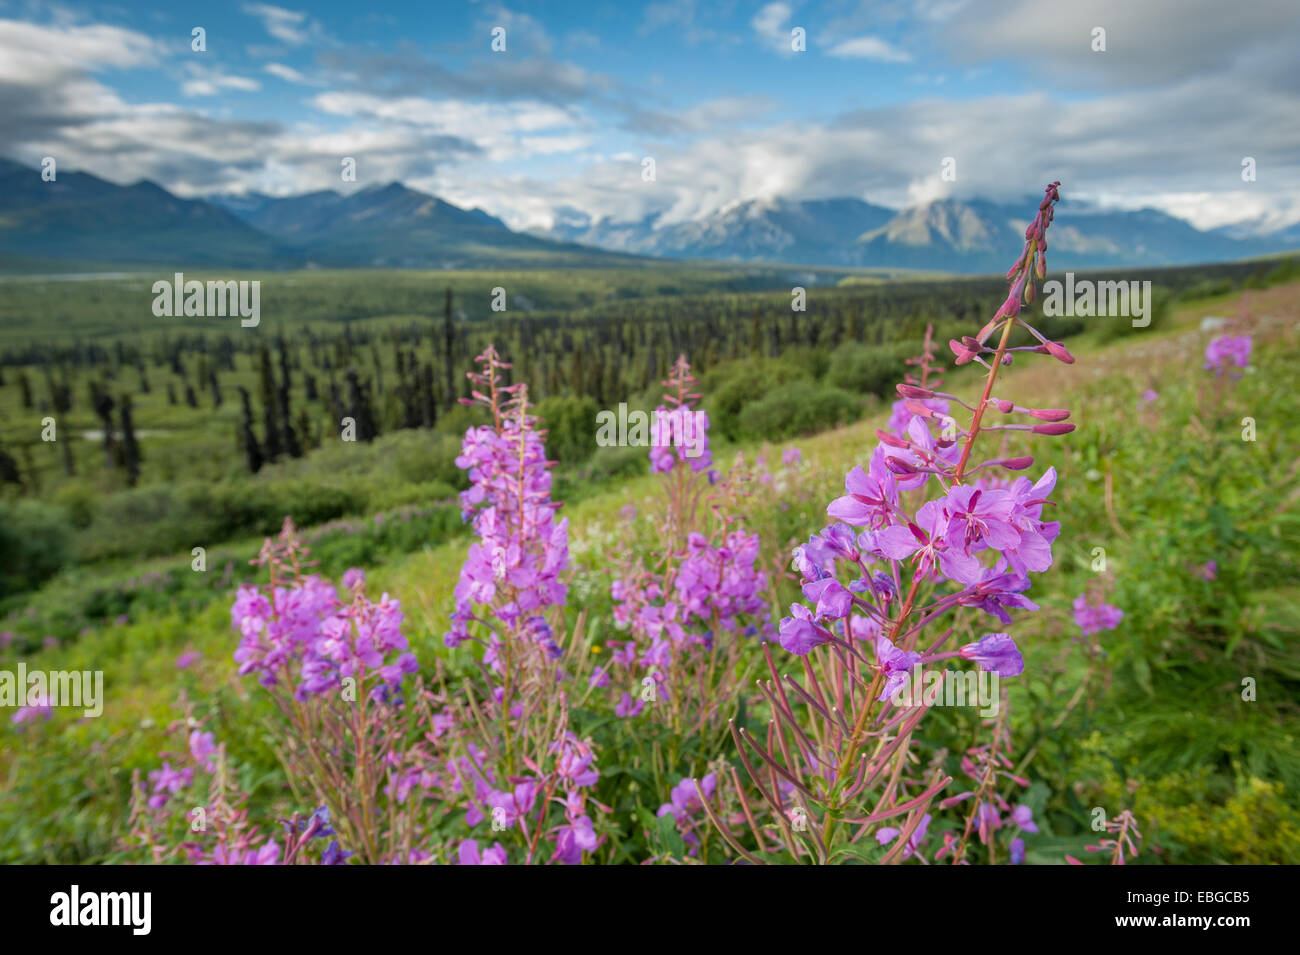 Fireweed (Epilobium angustifolium) growing with forest and mountain landscape in Alaska. Stock Photo